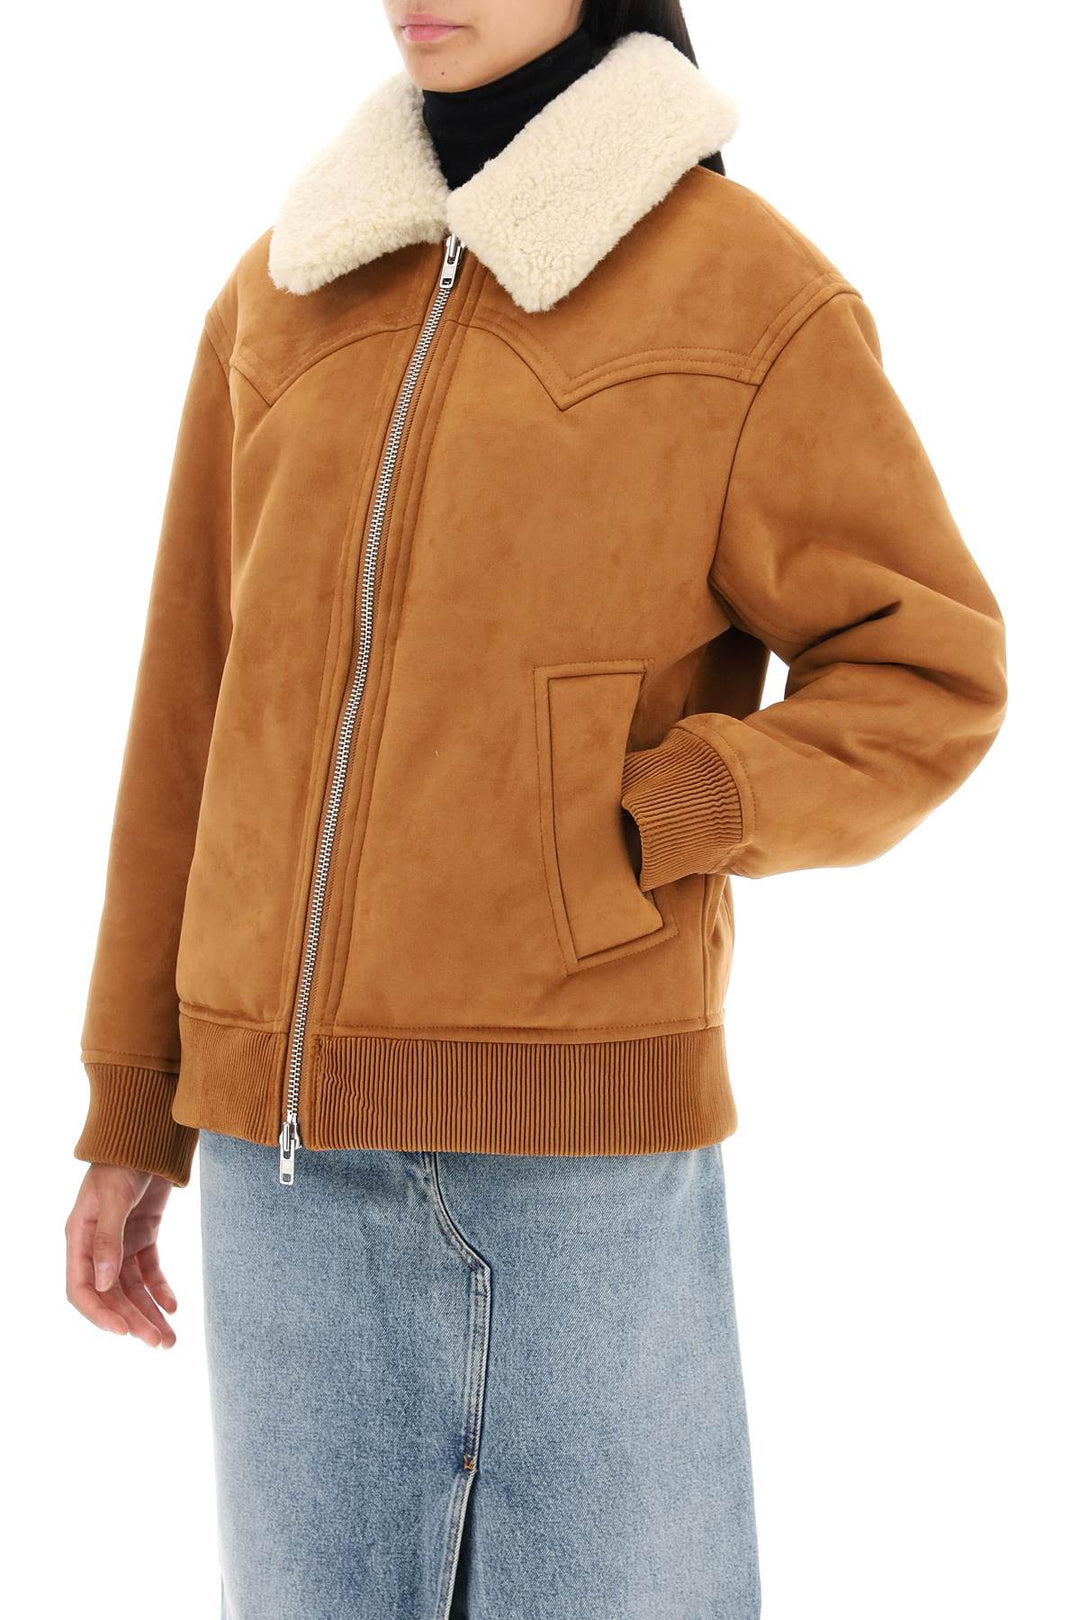 Stand Studio Lillee Eco Shearling Bomber Jacket   Marrone